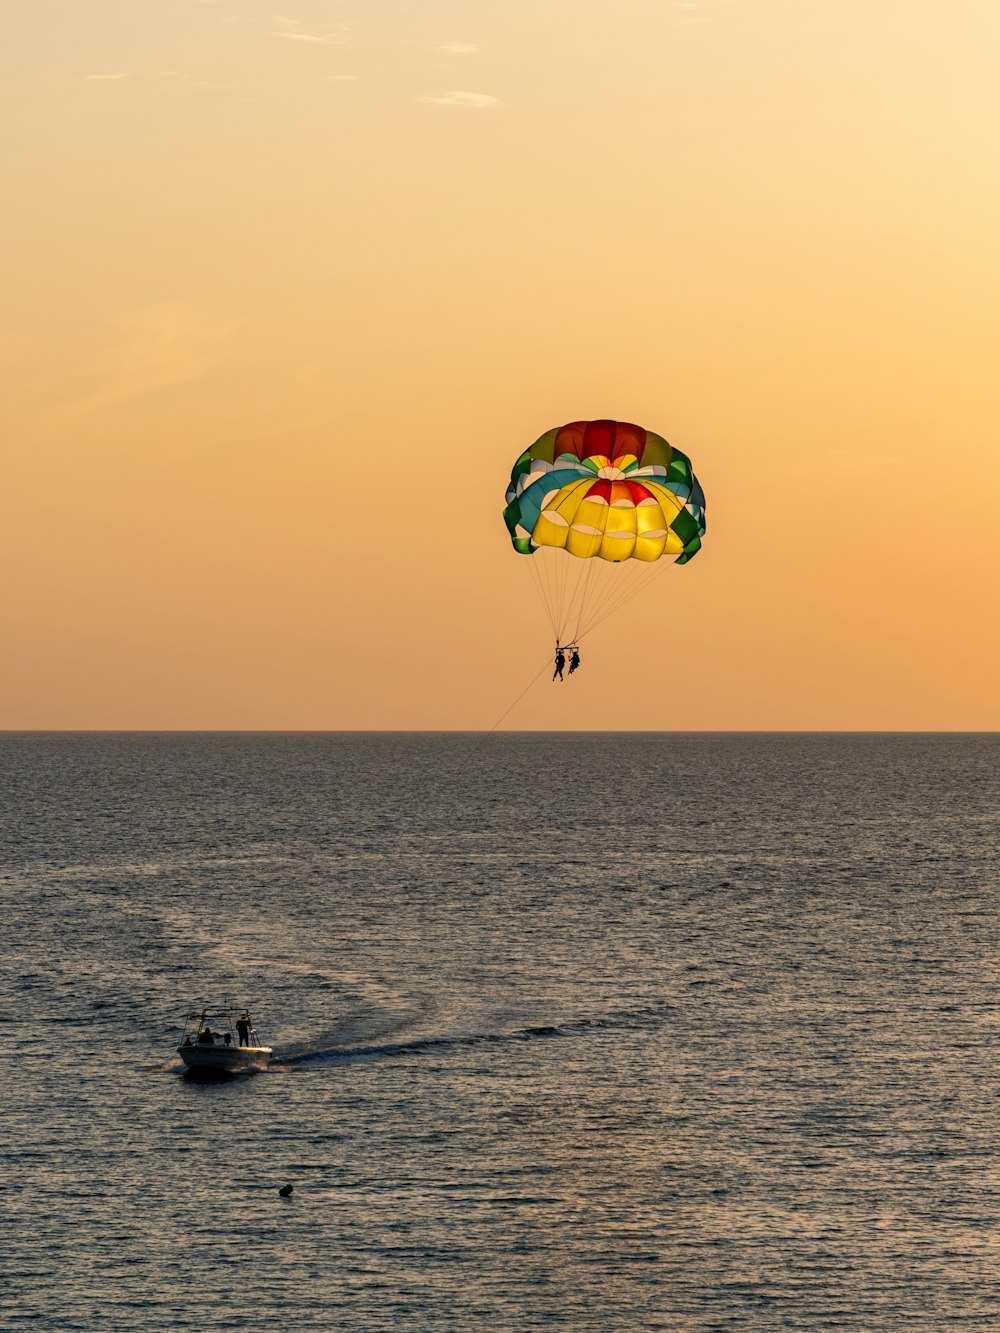 a person parasailing in the ocean at sunset